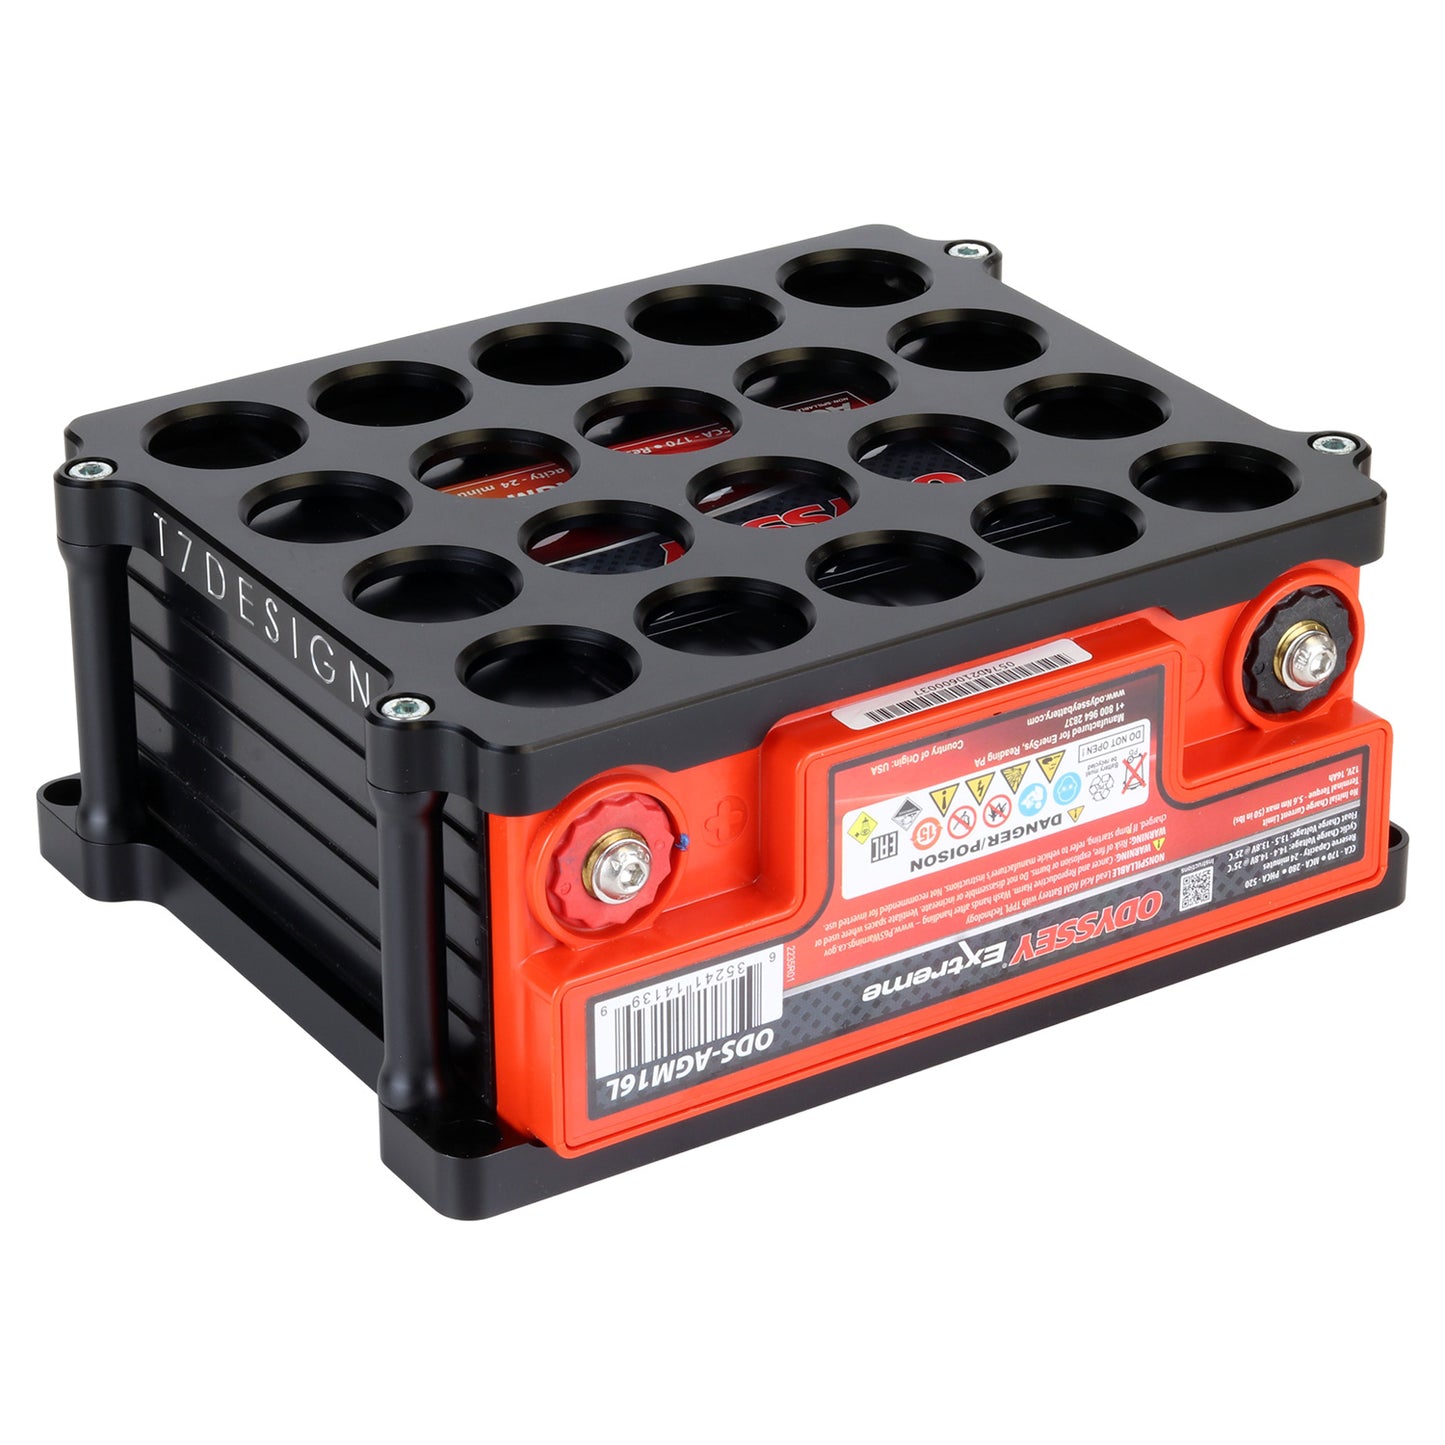 Odyssey PC680 Battery Cage